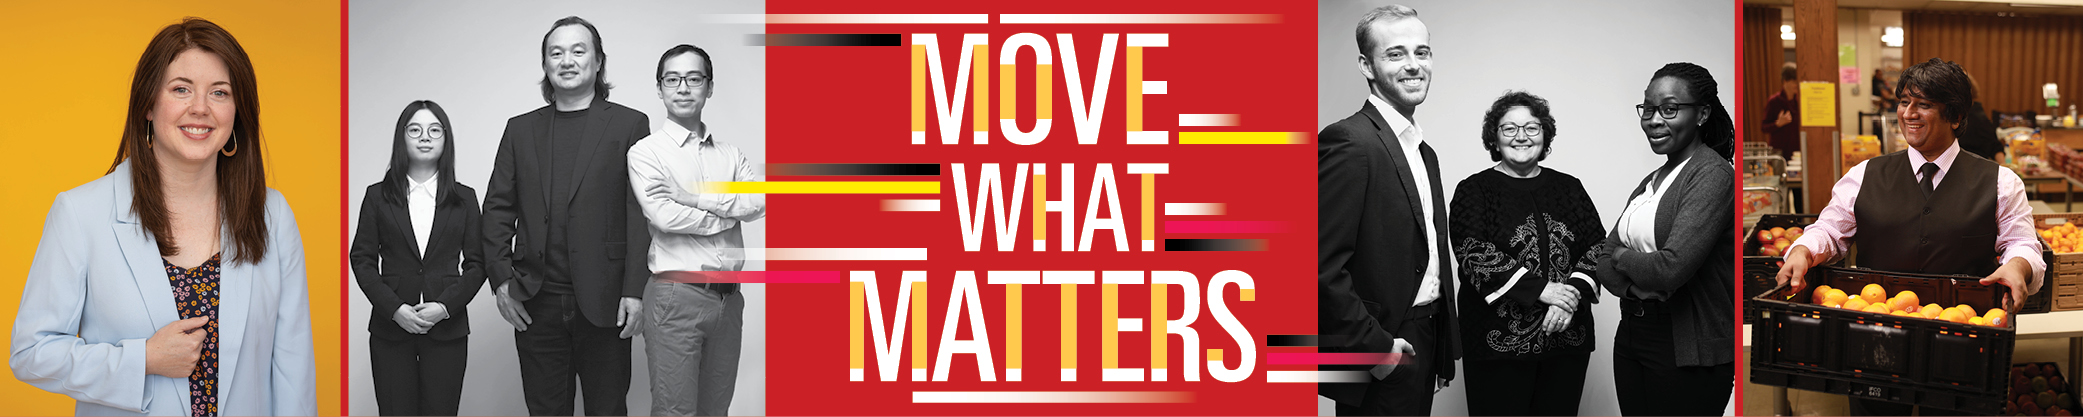 Move What Matters logo within photo collage of four images. A portrait of Assistant Professor of Chemistry Robbyn Anand, a group shot of Professor Lie Tang and his two graduate researchers who make up Team Rover, a group photo of Global Professor Gail Nonnecke with her two students and a final photo of researcher Sugam Sharma.